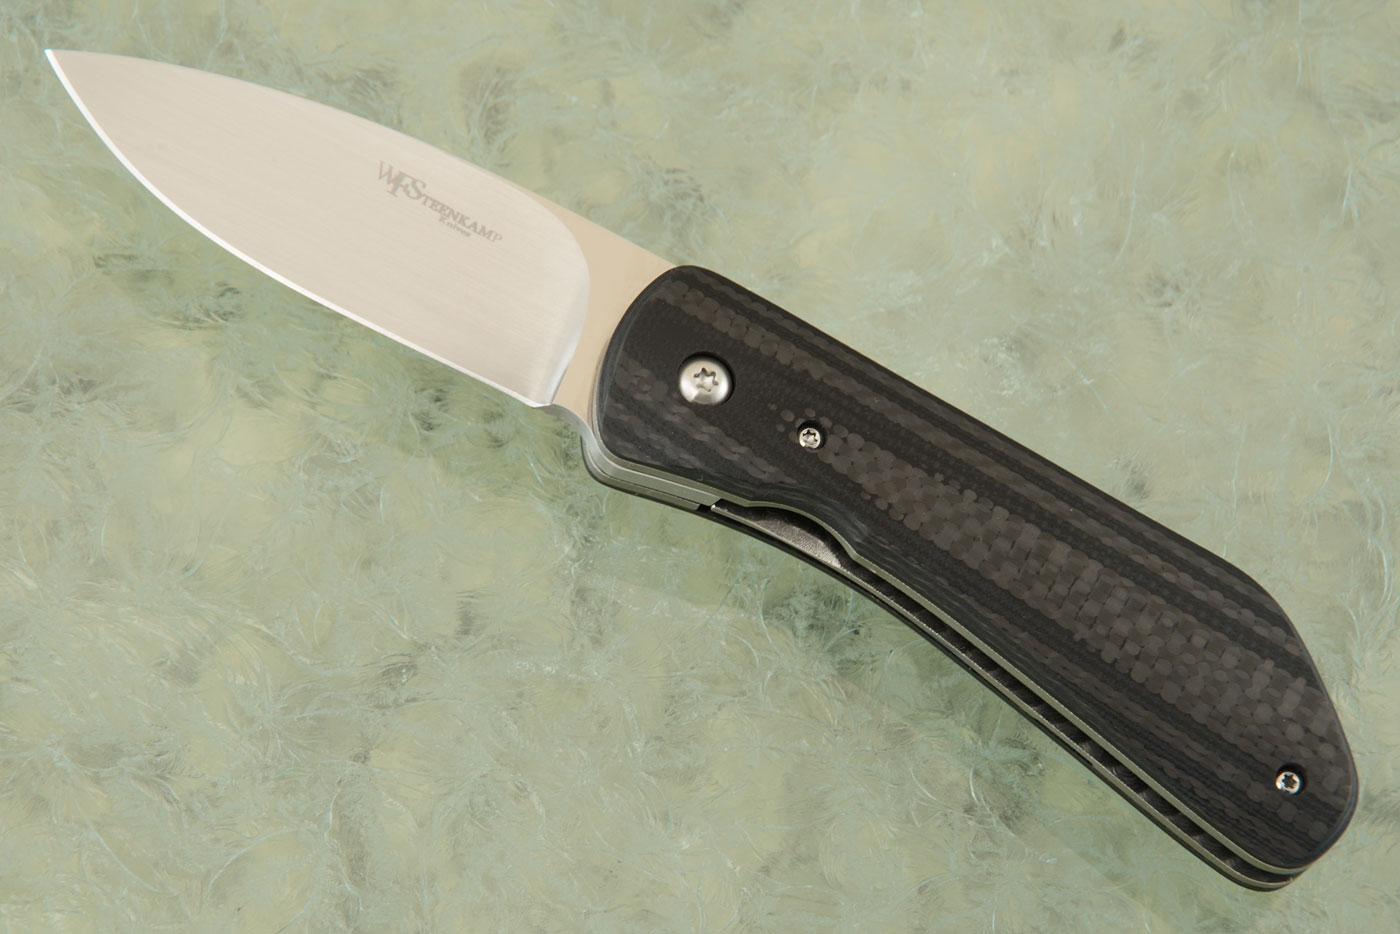 Swift Front Flipper with Stacked Carbon Fiber and Black G-10 (IKBS) - M390